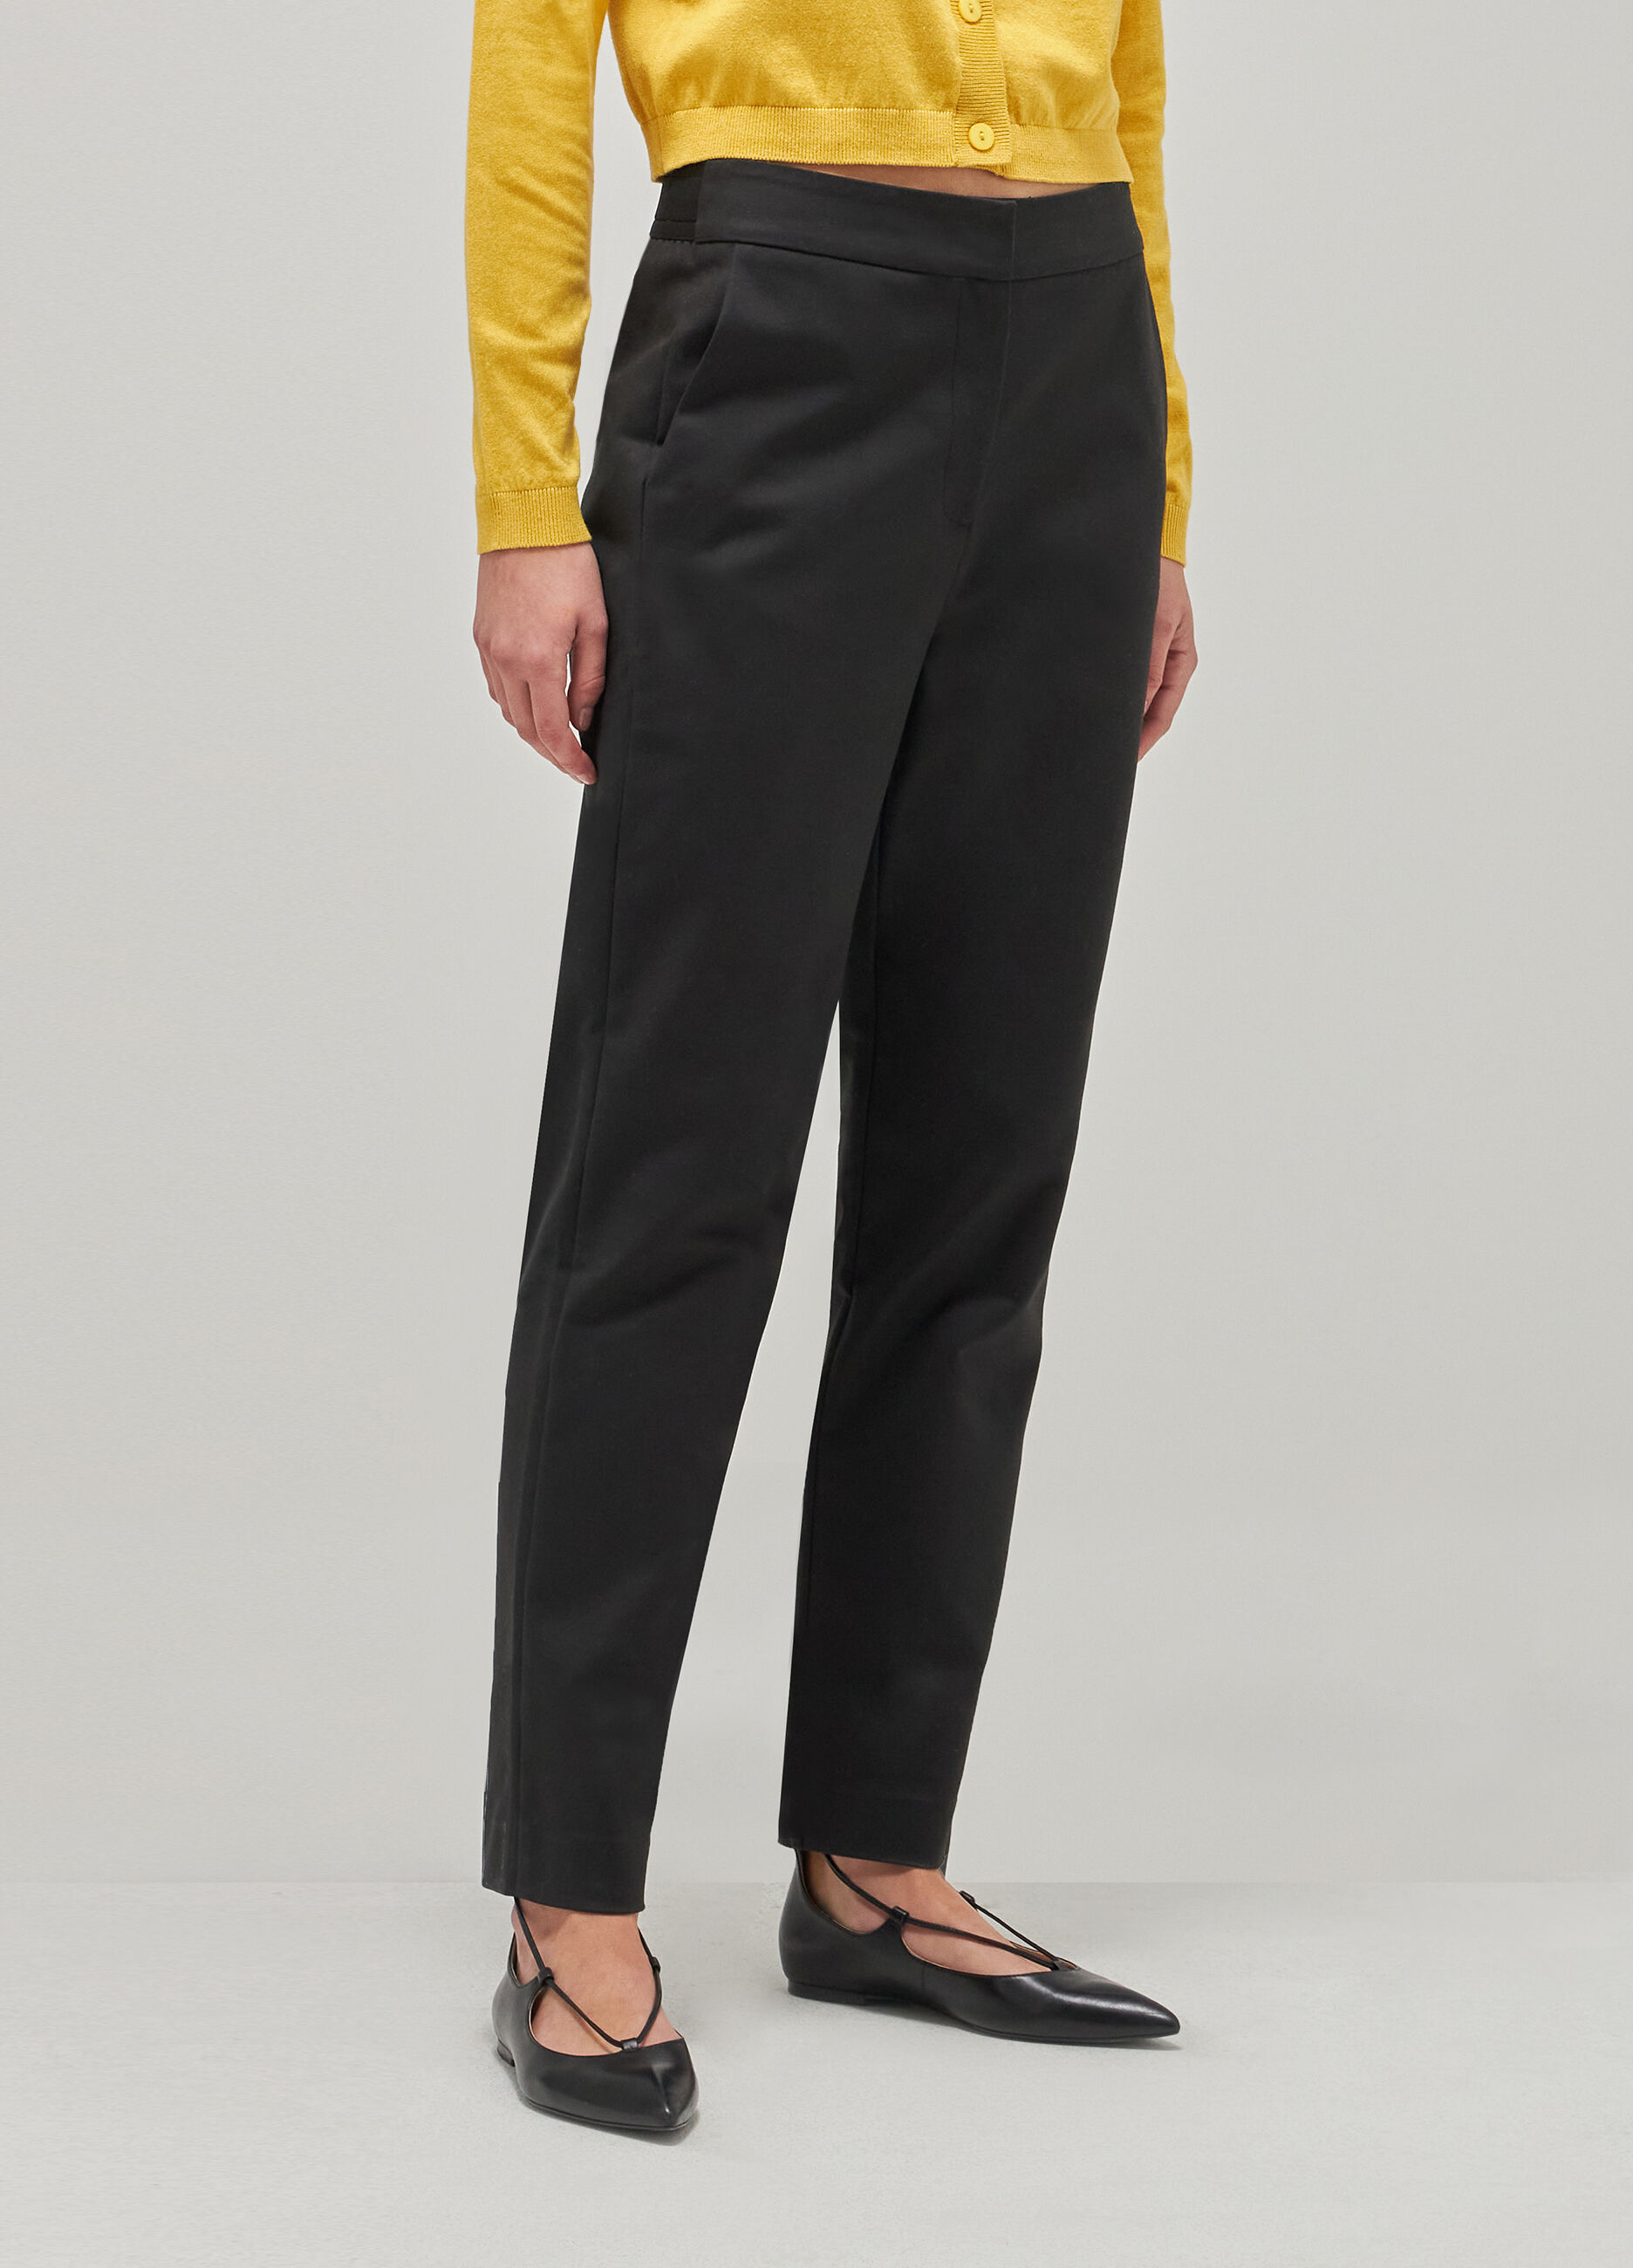 Black cigarette trousers with elastic_1